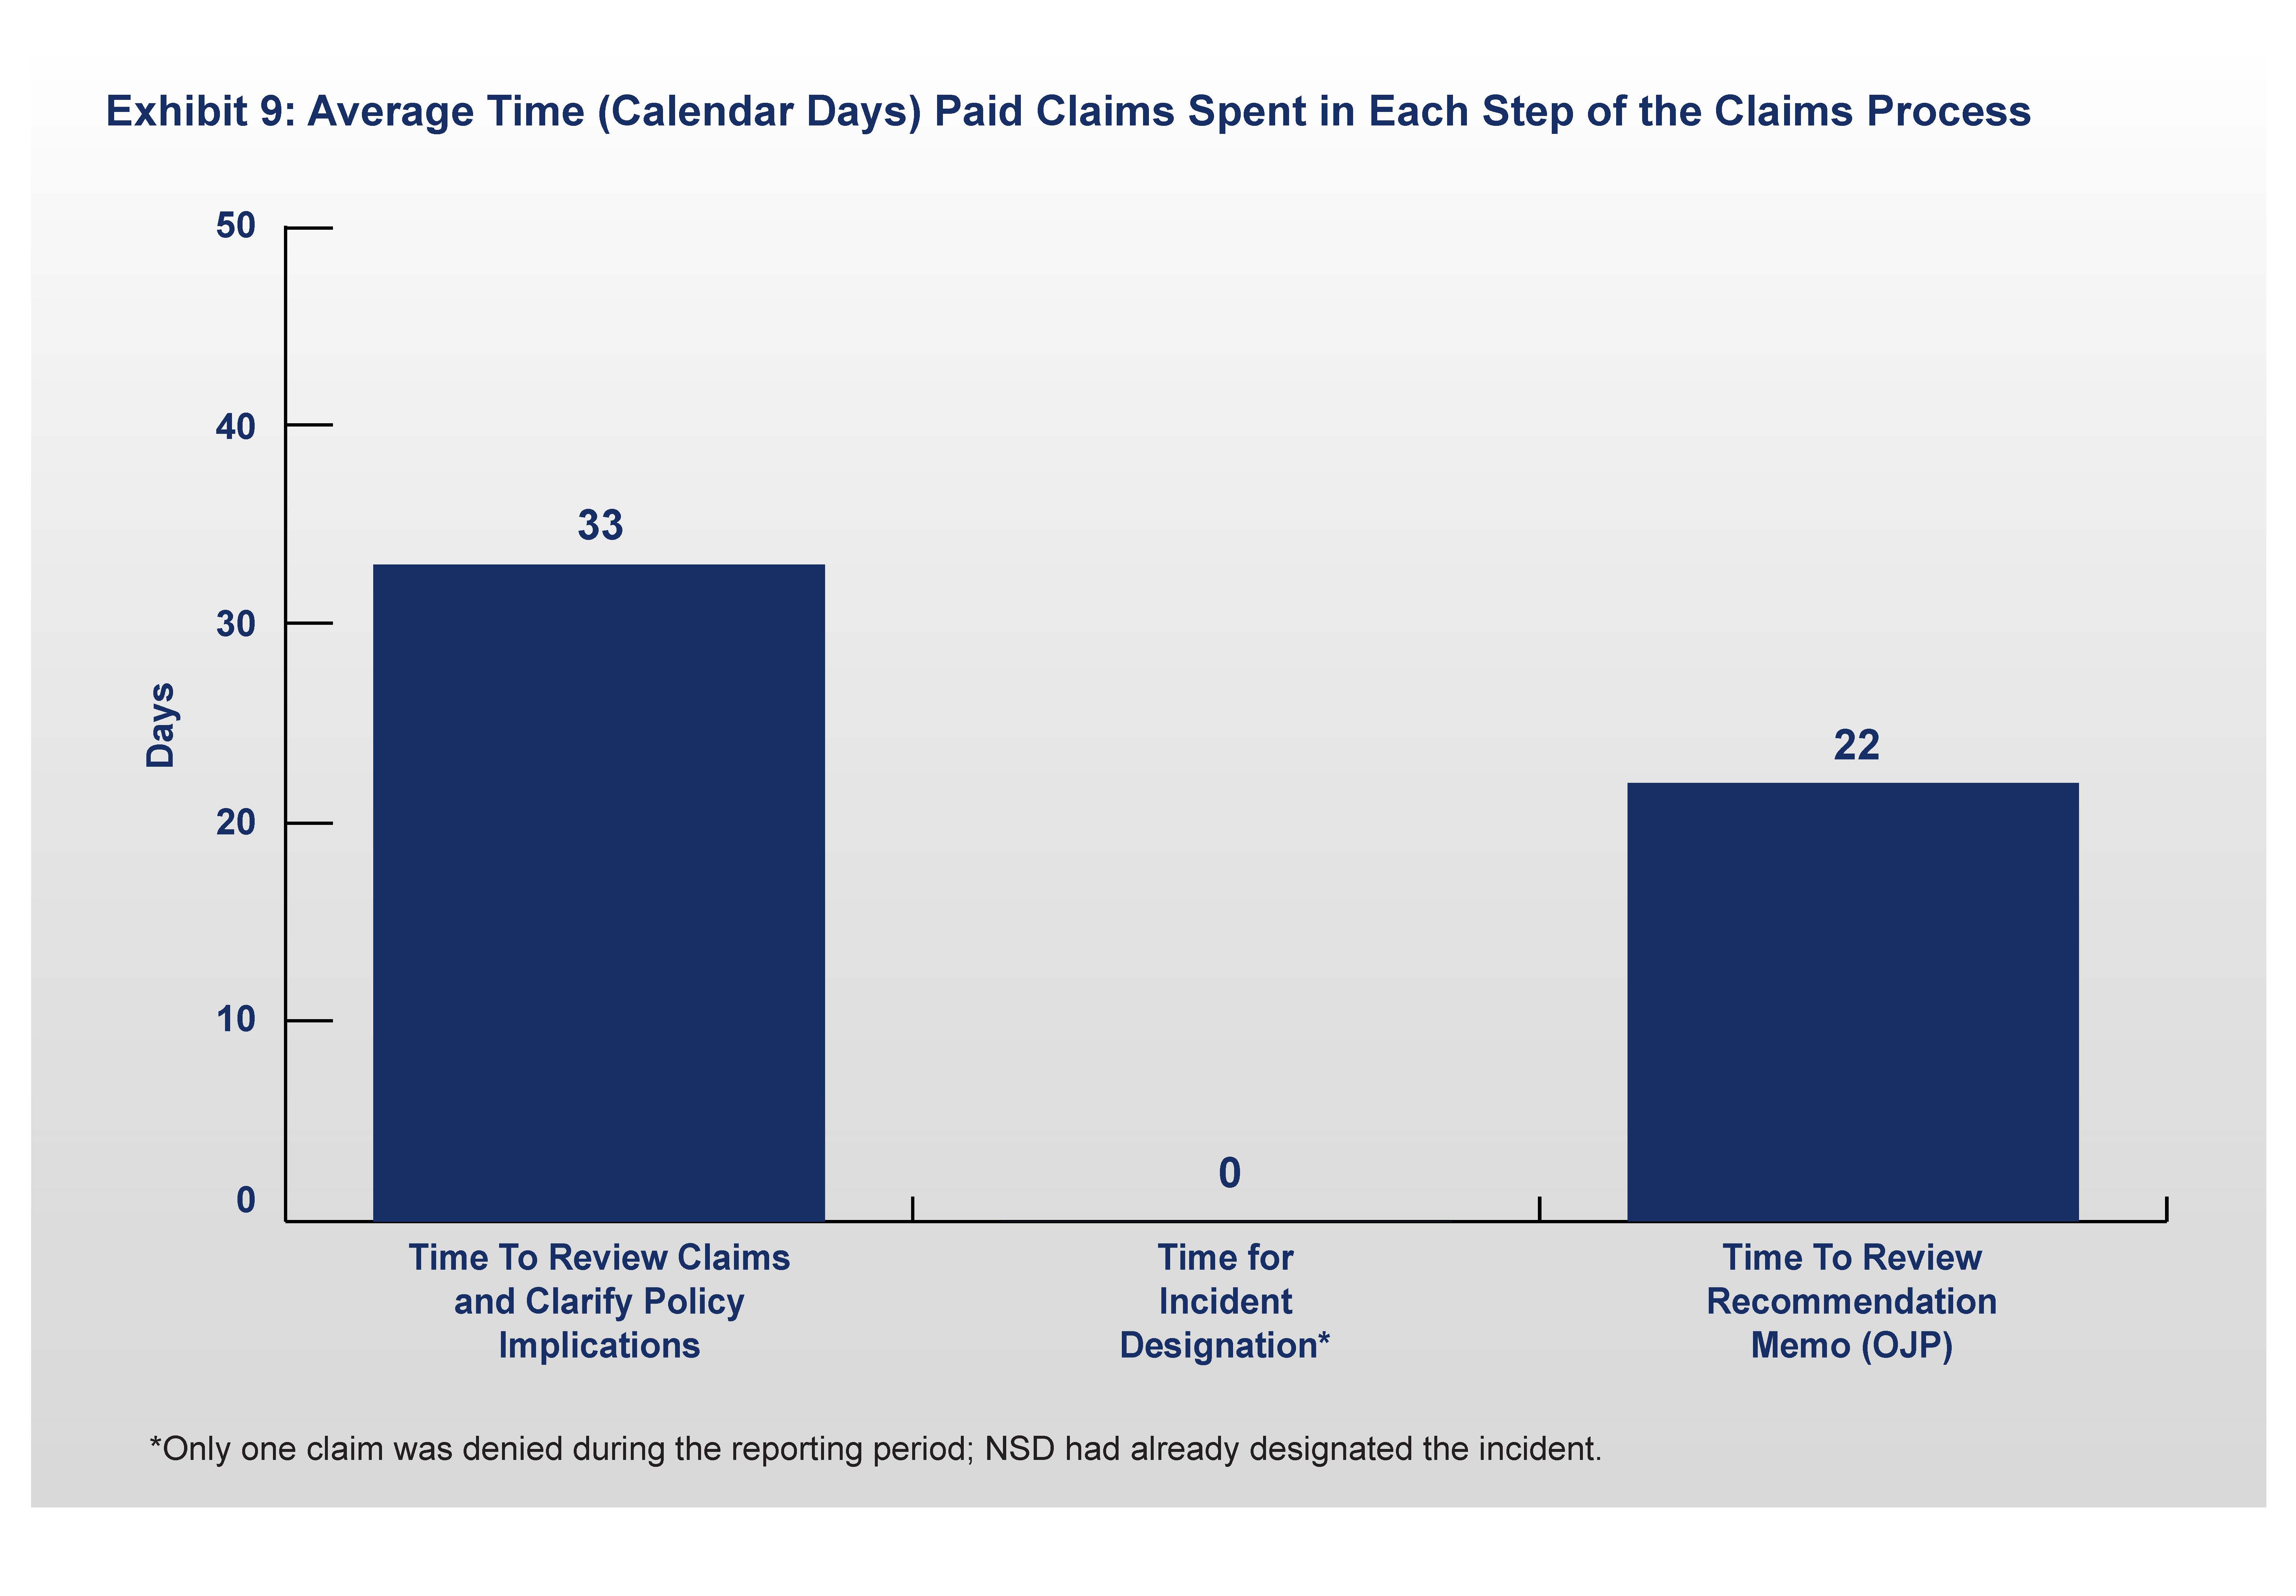 Exhibit 9: Average Time Denied Claims Spent in Each Step of the Claims Process